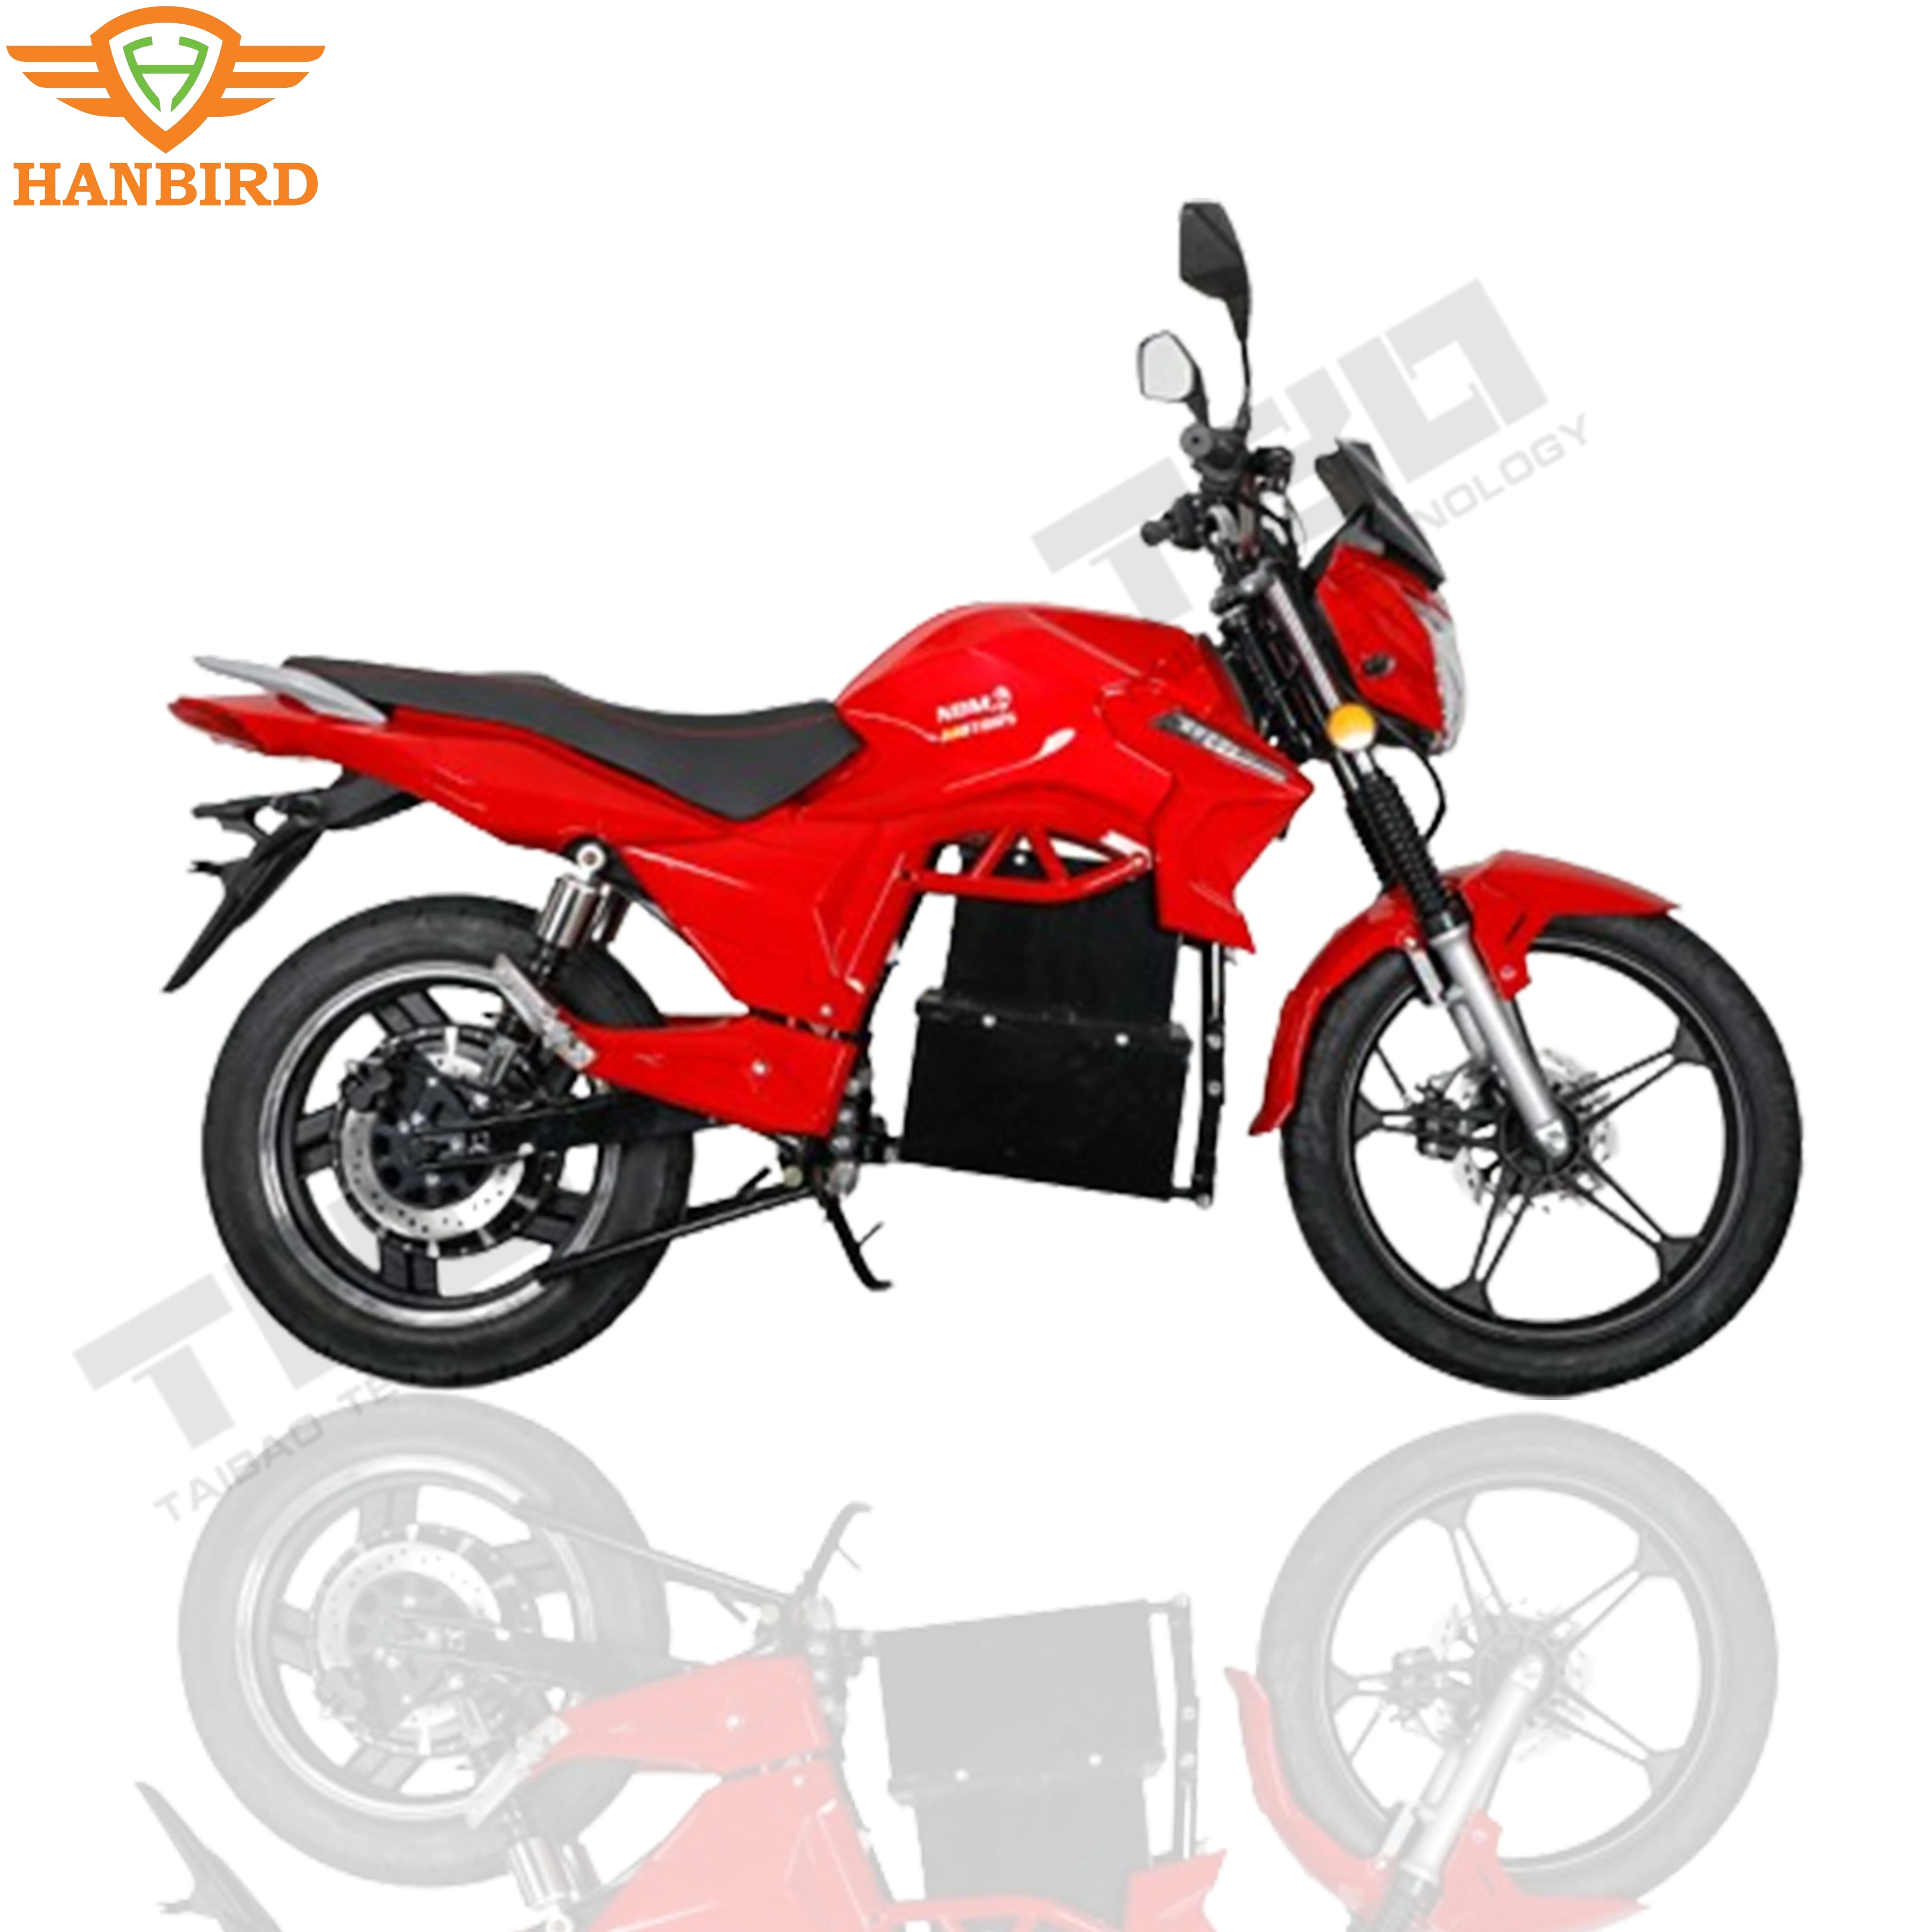 Cool customized color lithium battery off road High performance high speed Electric motorcycle Motorbike with LiFePO4